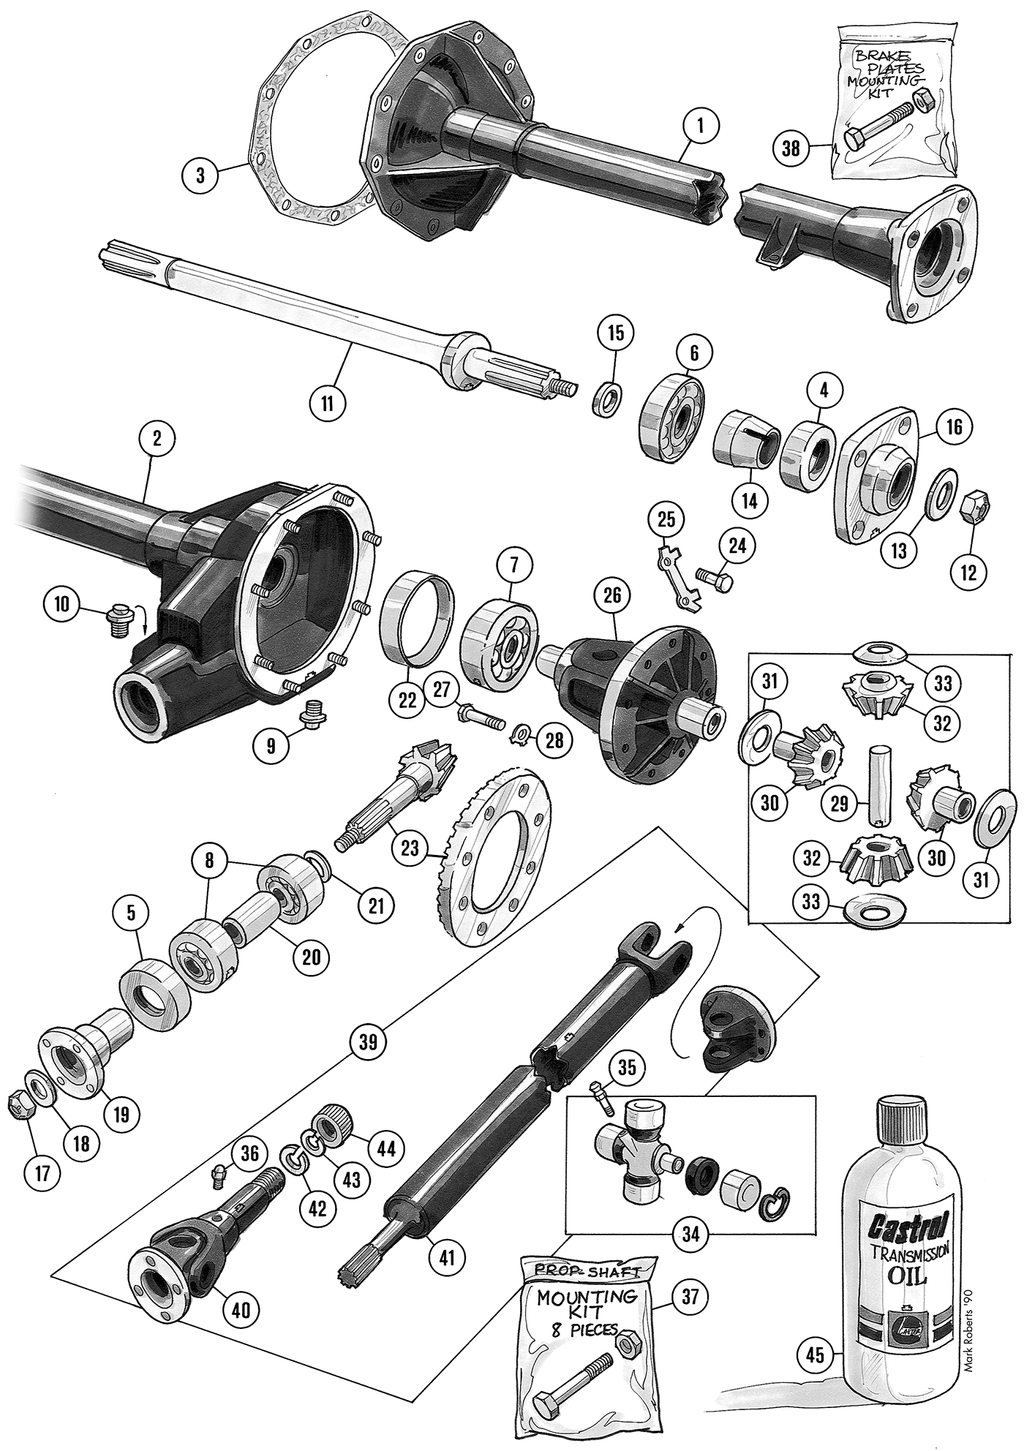 MGTD-TF 1949-1955 - Differentials & parts - Rear axle, propshaft - 1